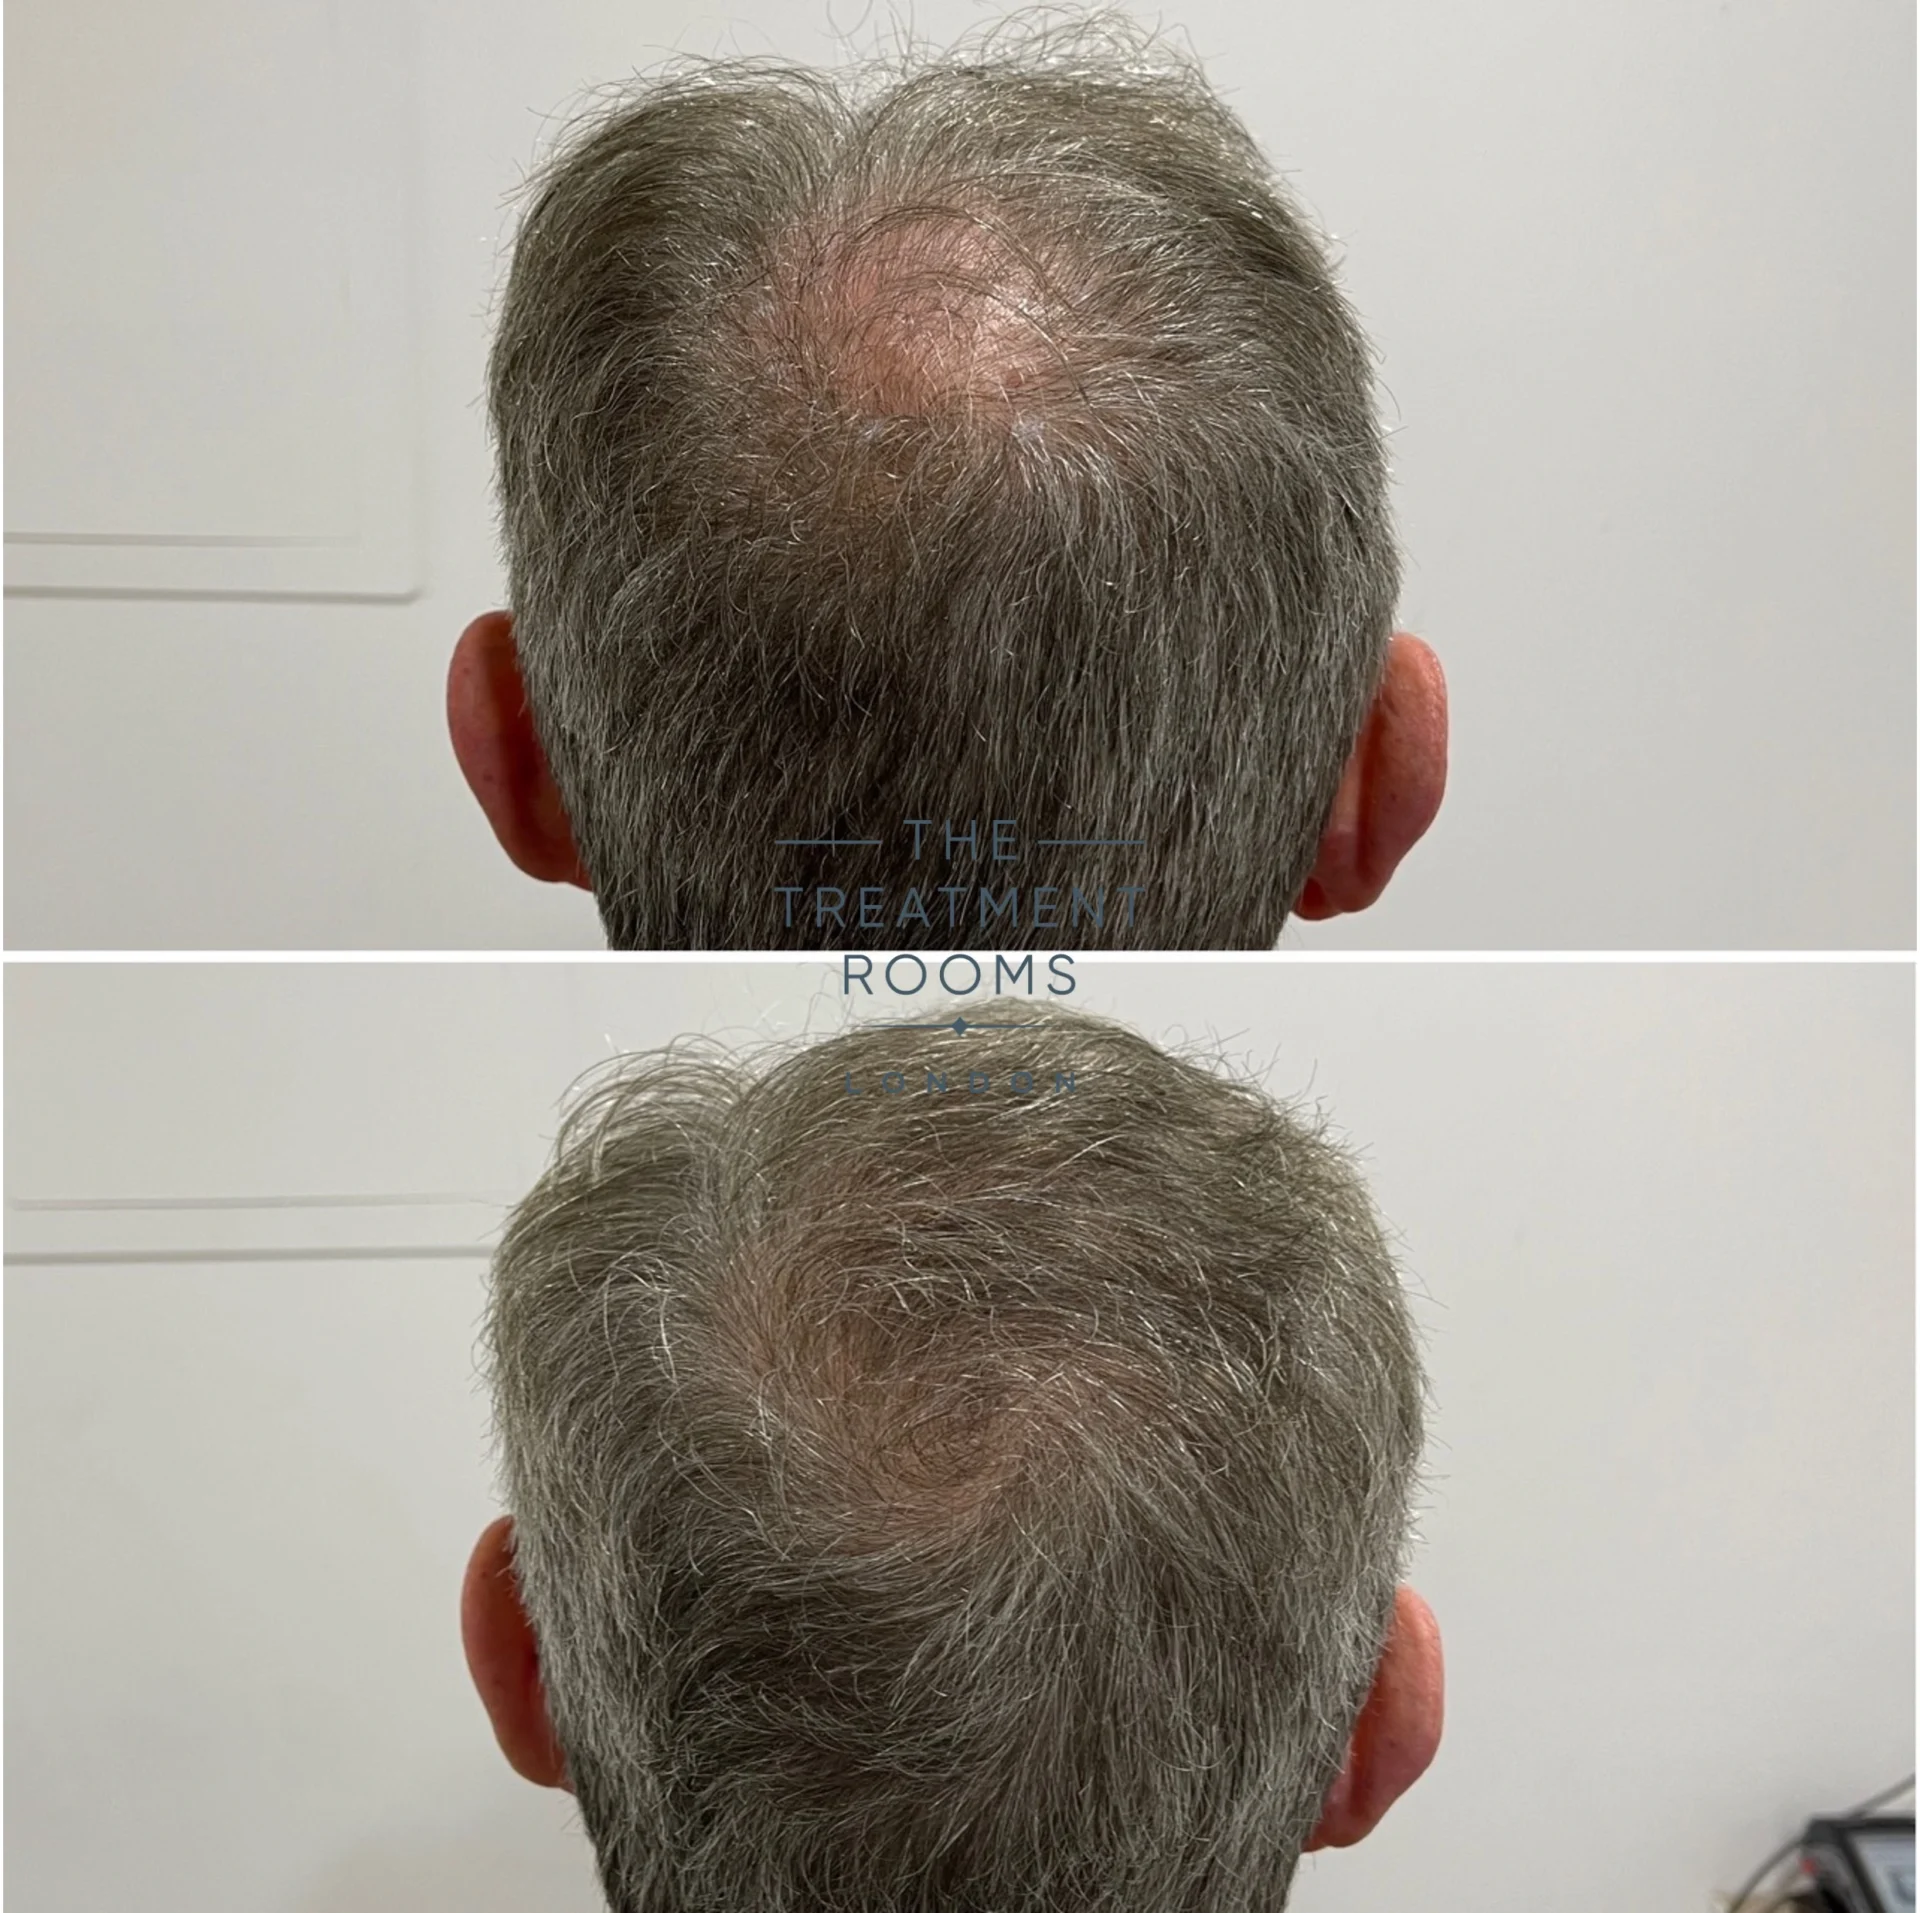 681 grafts hair transplant crown before and after